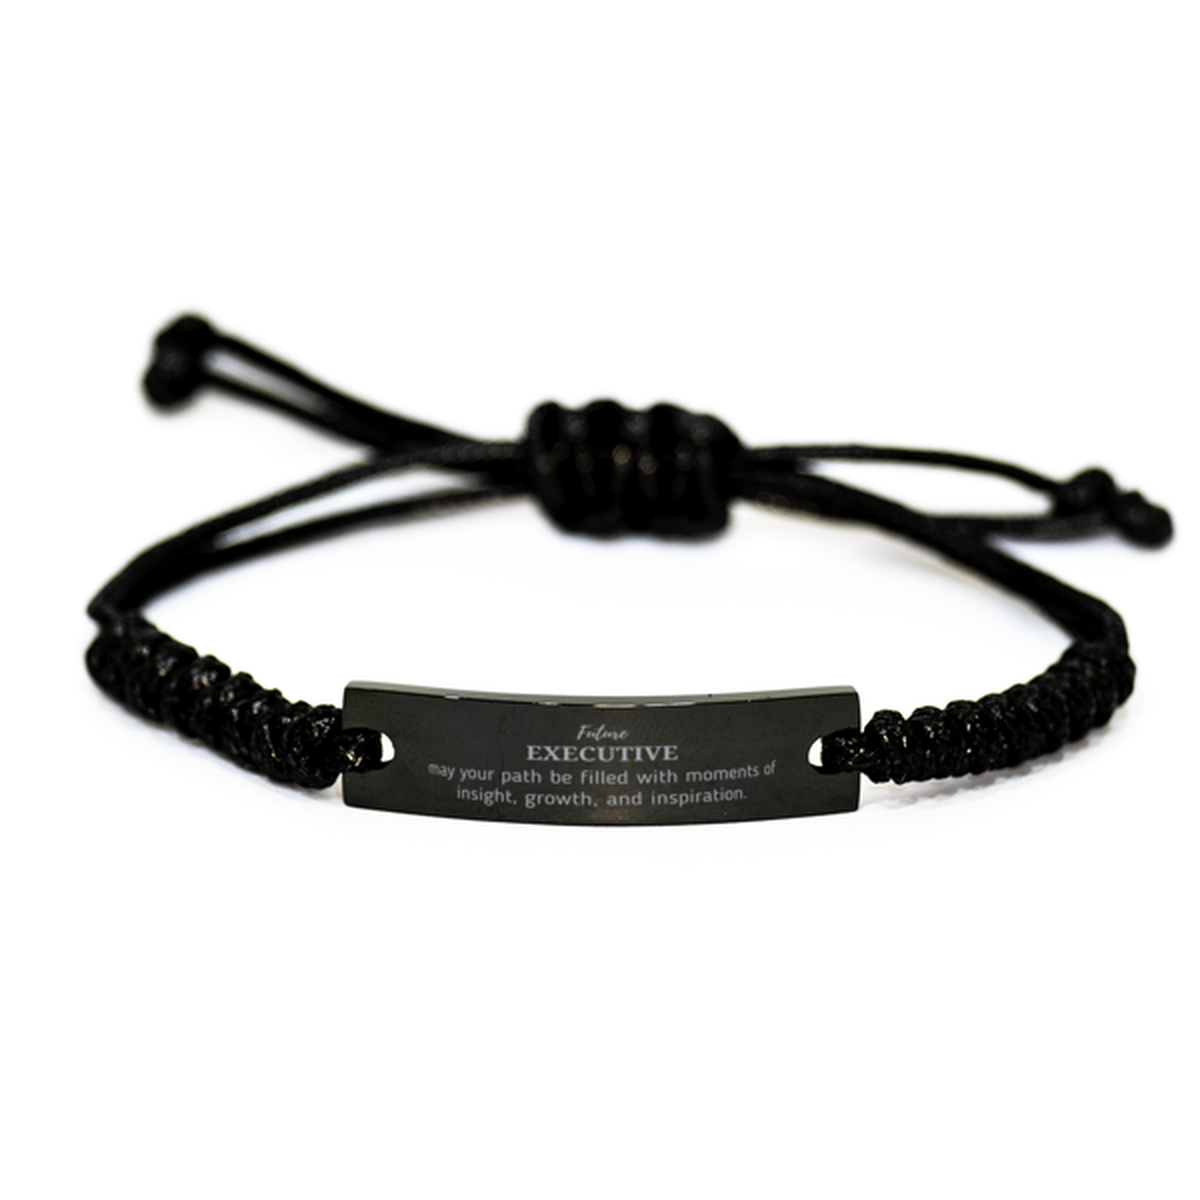 Future Executive Gifts, May your path be filled with moments of insight, Graduation Gifts for New Executive, Christmas Unique Black Rope Bracelet For Men, Women, Friends